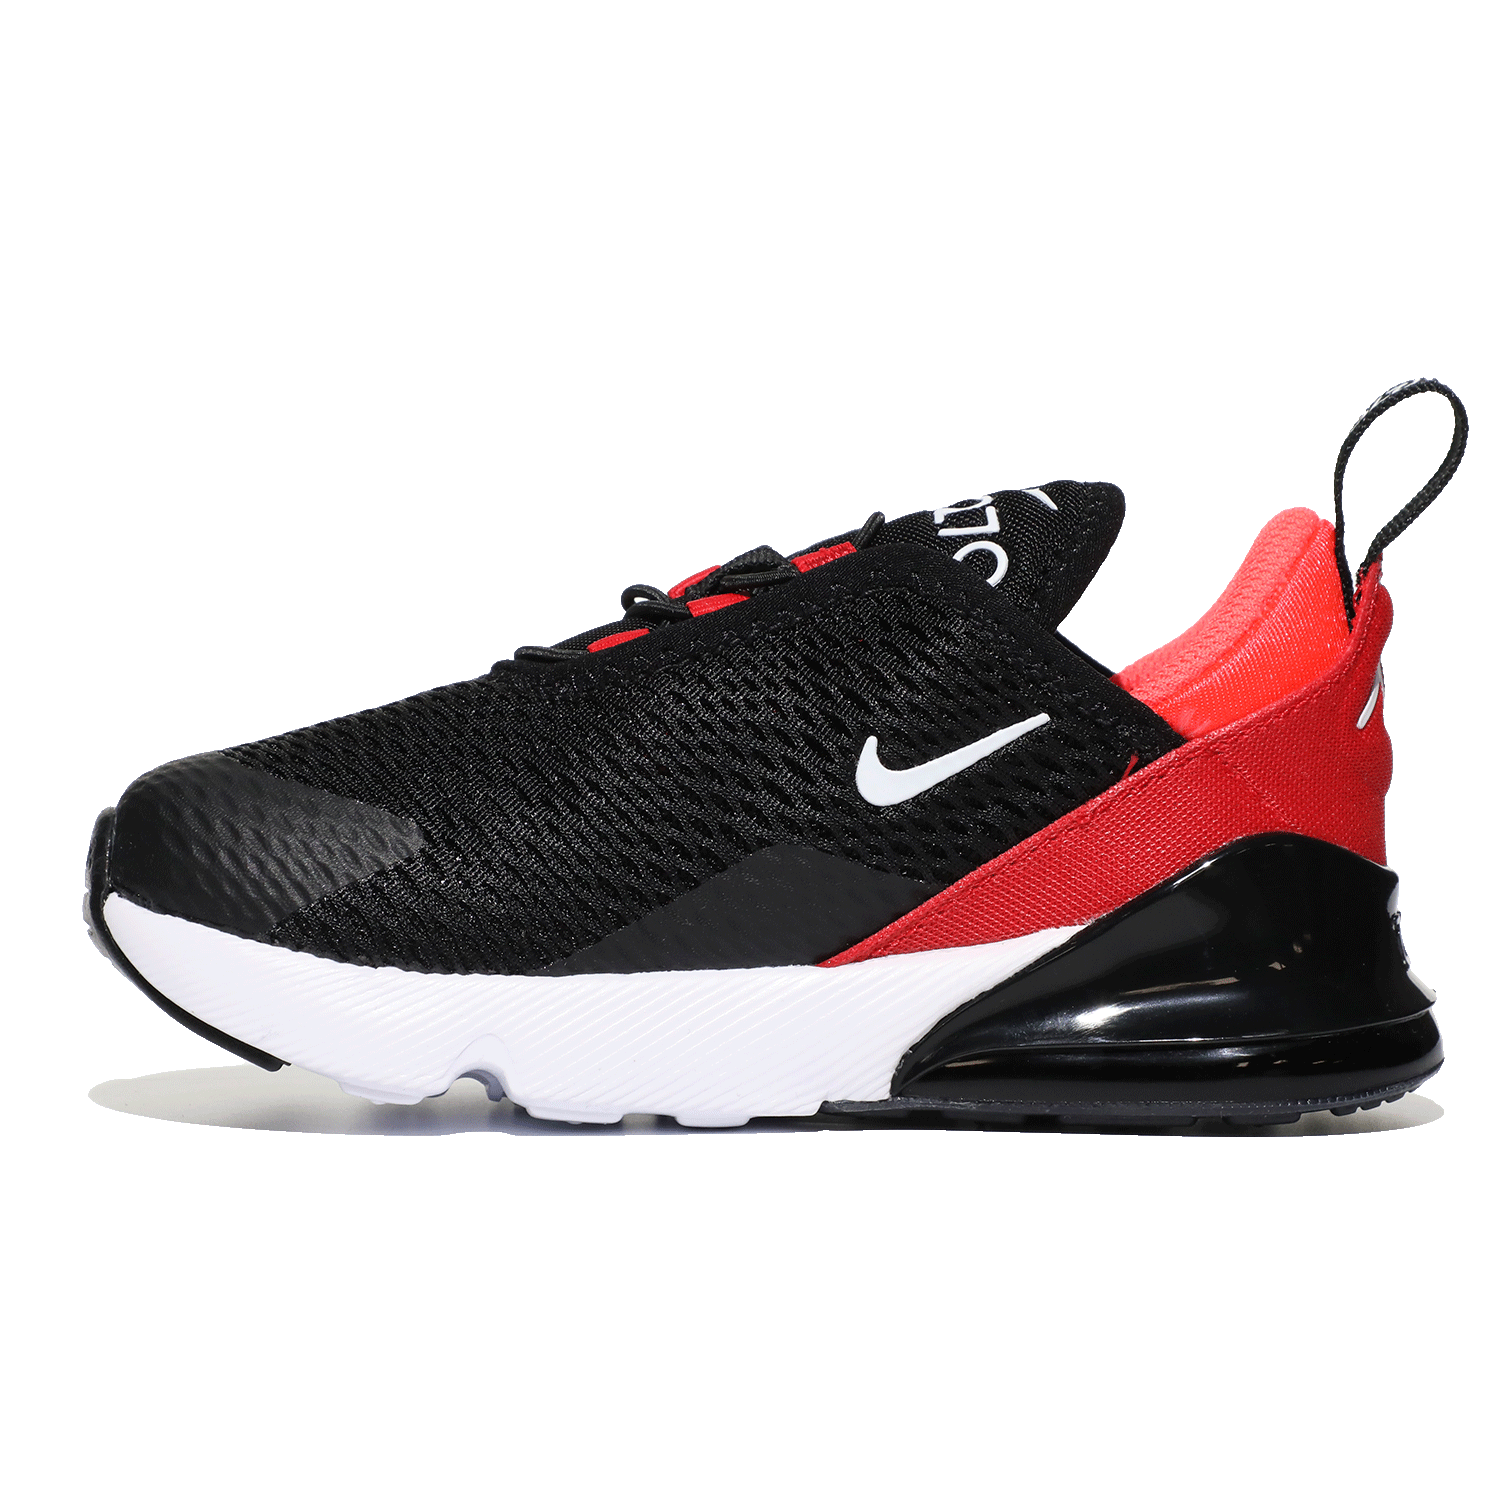 Image 6 of Air Max 270 (Infant/Toddler)